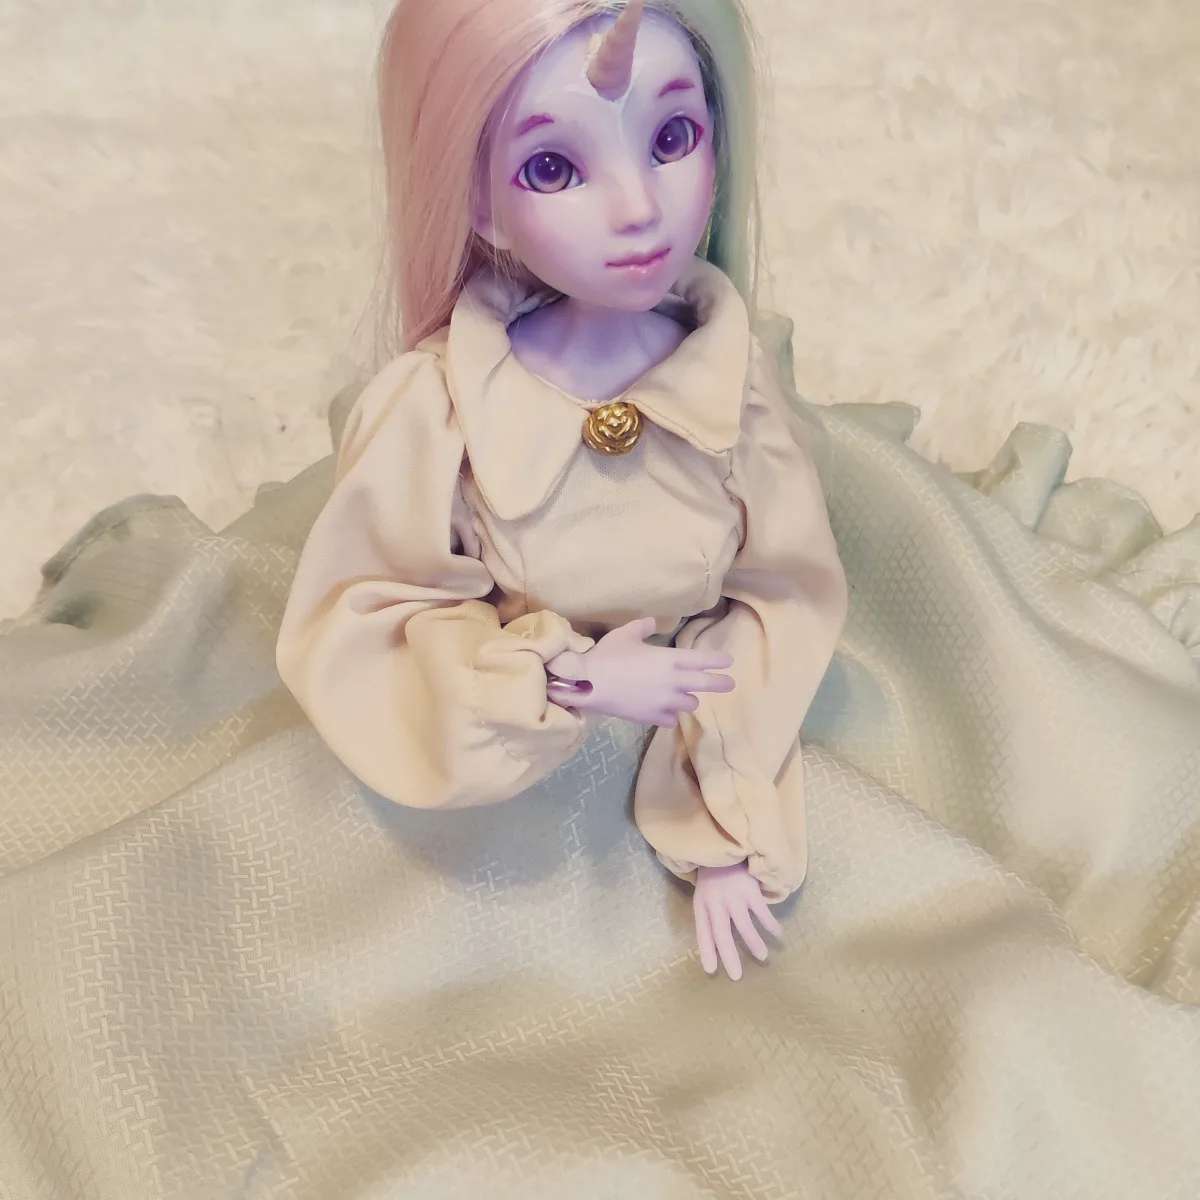 Profile picture of a purple ball jointed doll with a unicorn horn